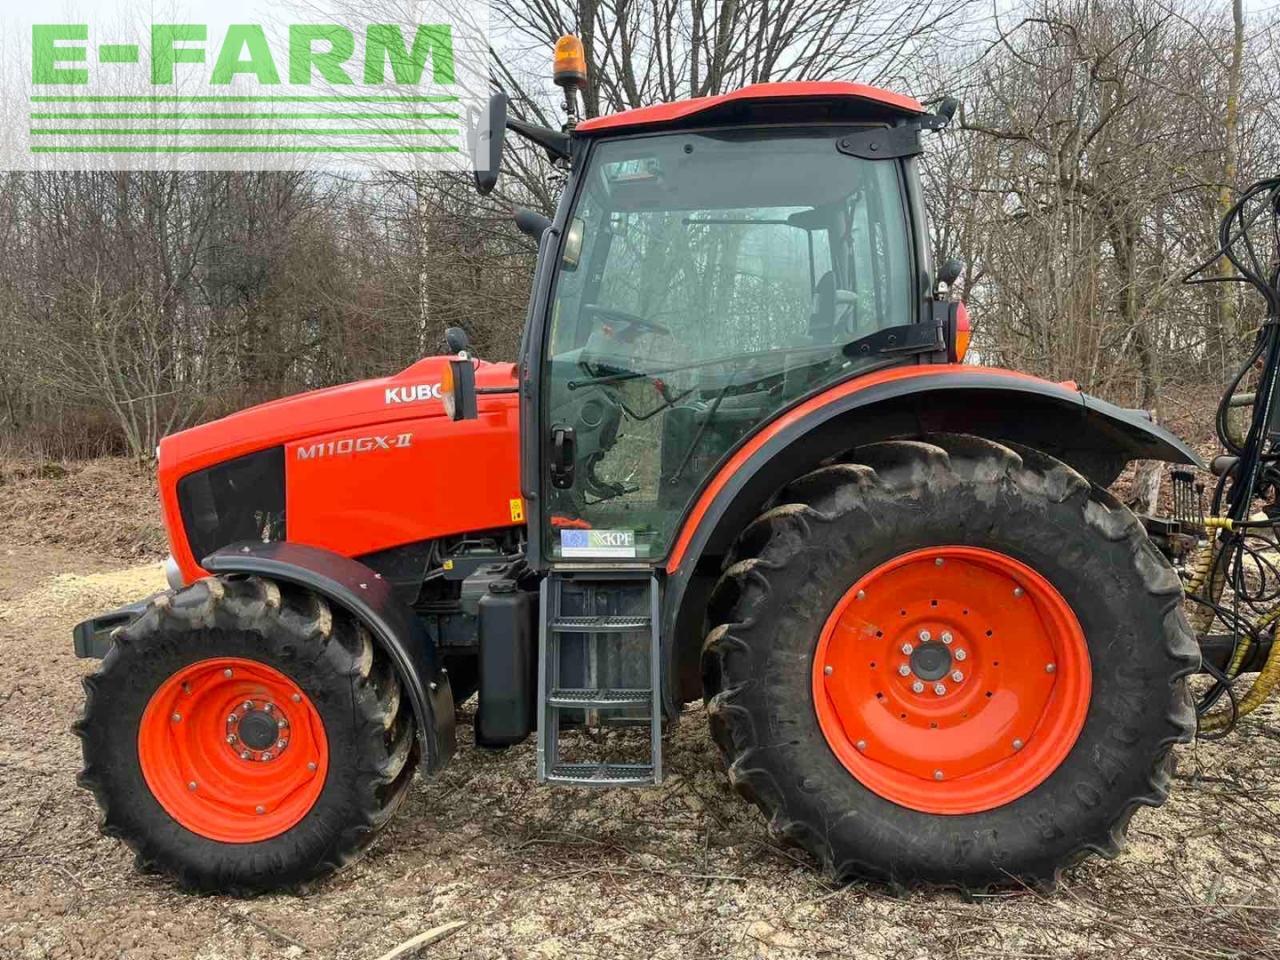 Farm tractor Kubota M110 GXII: picture 5